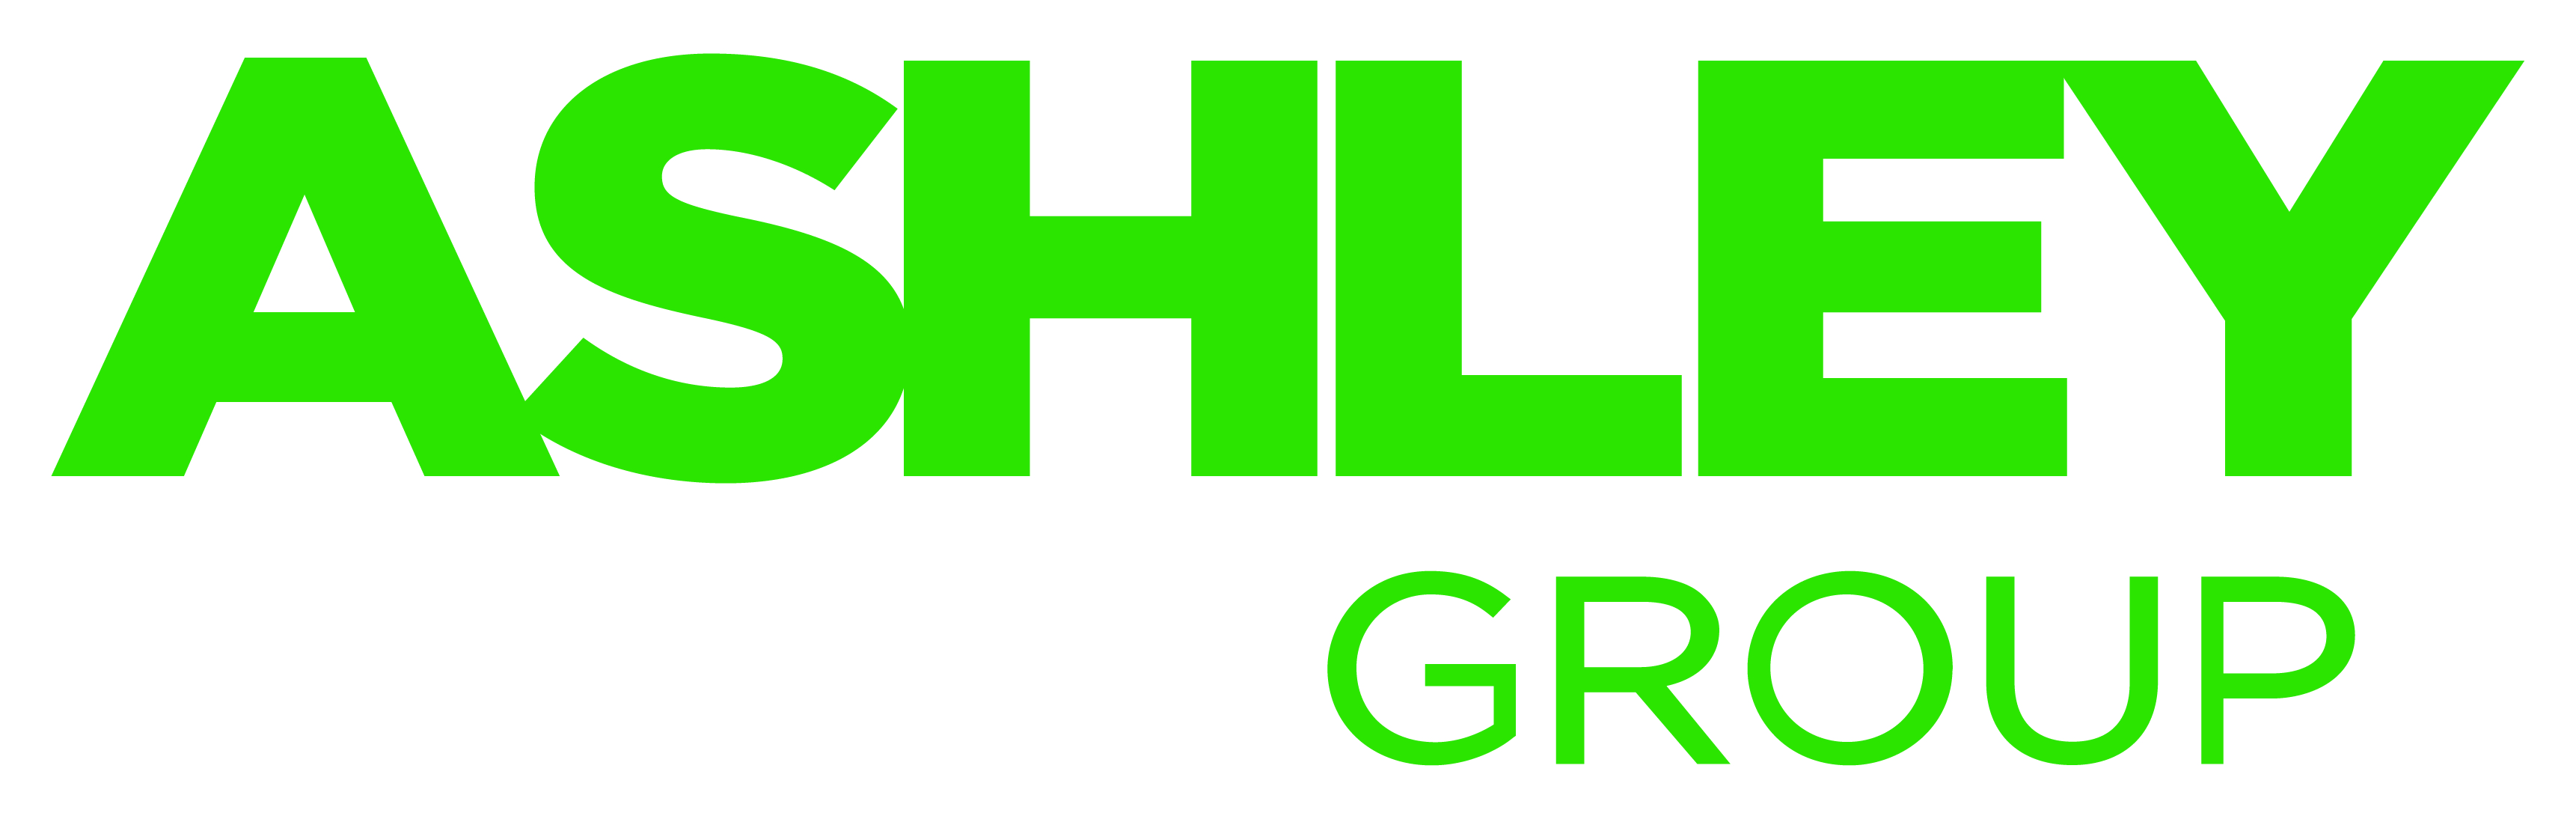 Company Ashley Group. Description and contact information.